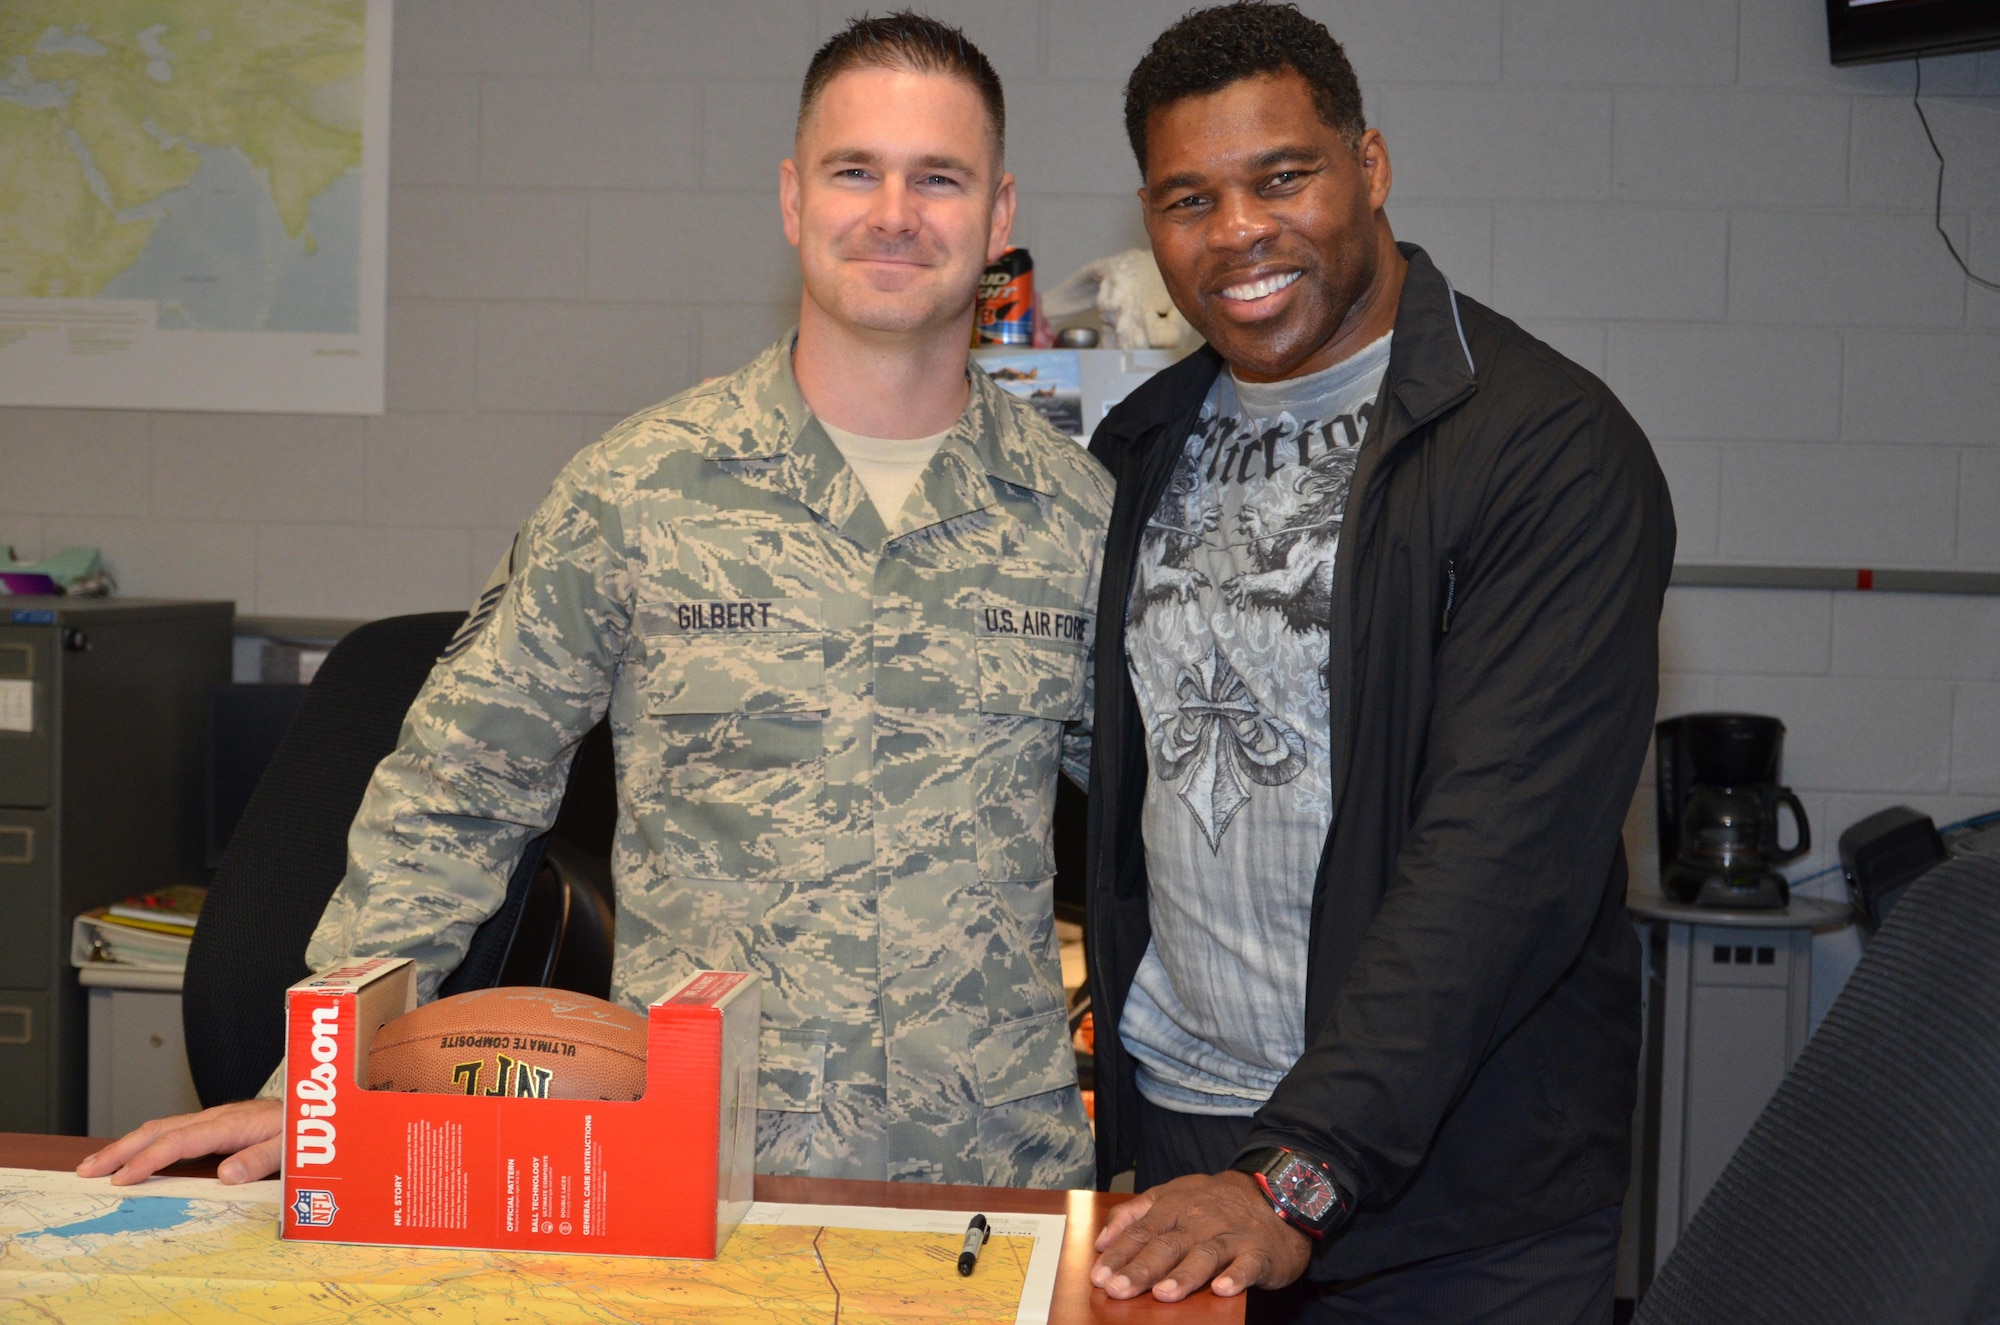 NFL football hero Herschel Walker visited Patrick Air Force Base, January 24, taking  time to meet with Guardian Angel Airmen from the 920th Rescue Wing. These elite warrior Airmen undergo intense physical and mental training to rescue isolated personnel in combat. They toured Walker through their squadron and demonstrated some of their rescue skills. Throughout the visit, Walker held their rapt attention sharing lots of inspirational accounts of his days playing football. Later that afternoon, Walker stood in front of several hundred Patrick AFB employees who came to listen to his personal battled with mental illness. (U.S. Air Force photo/Maj. Cathleen Snow)
